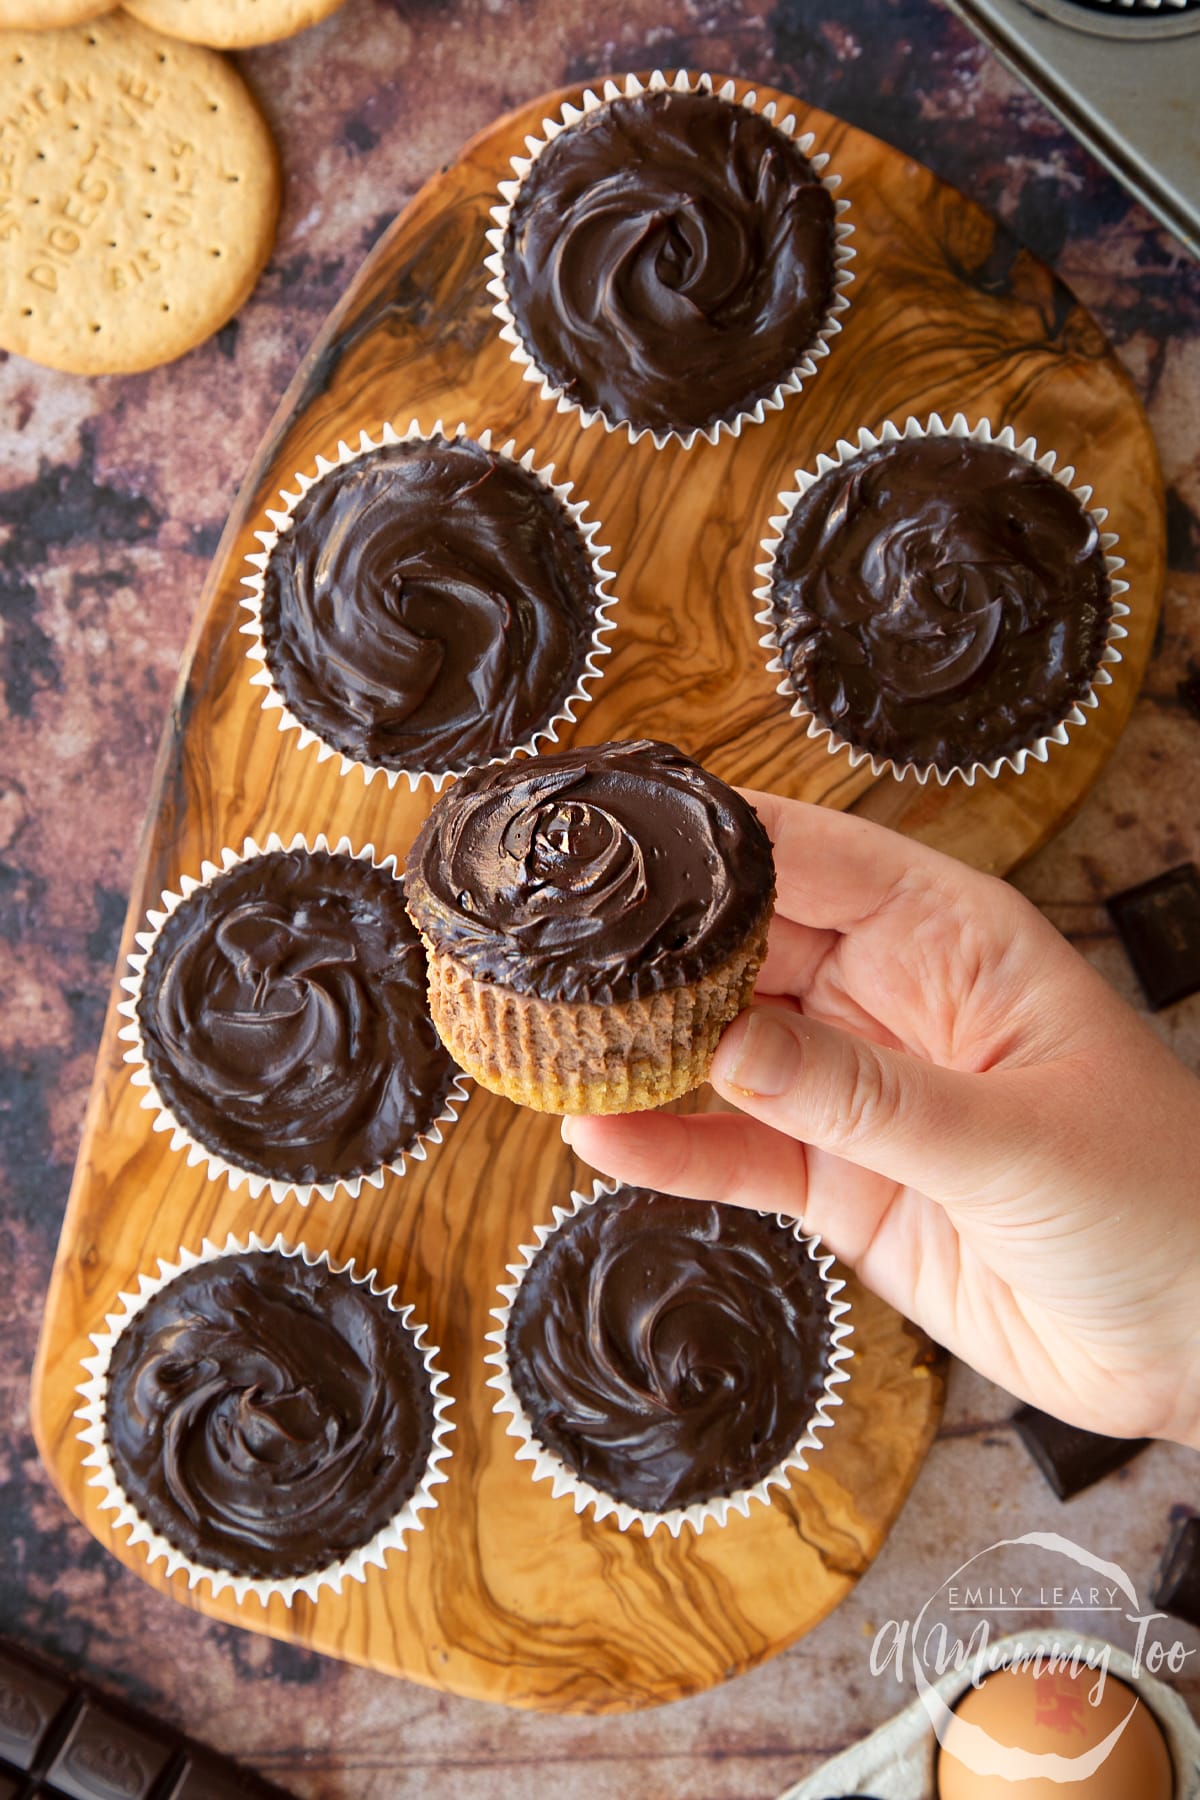 Chocolate cheesecake cupcakes in rows on an olive wood board, shown from above. A hand holds an unwrapped one.